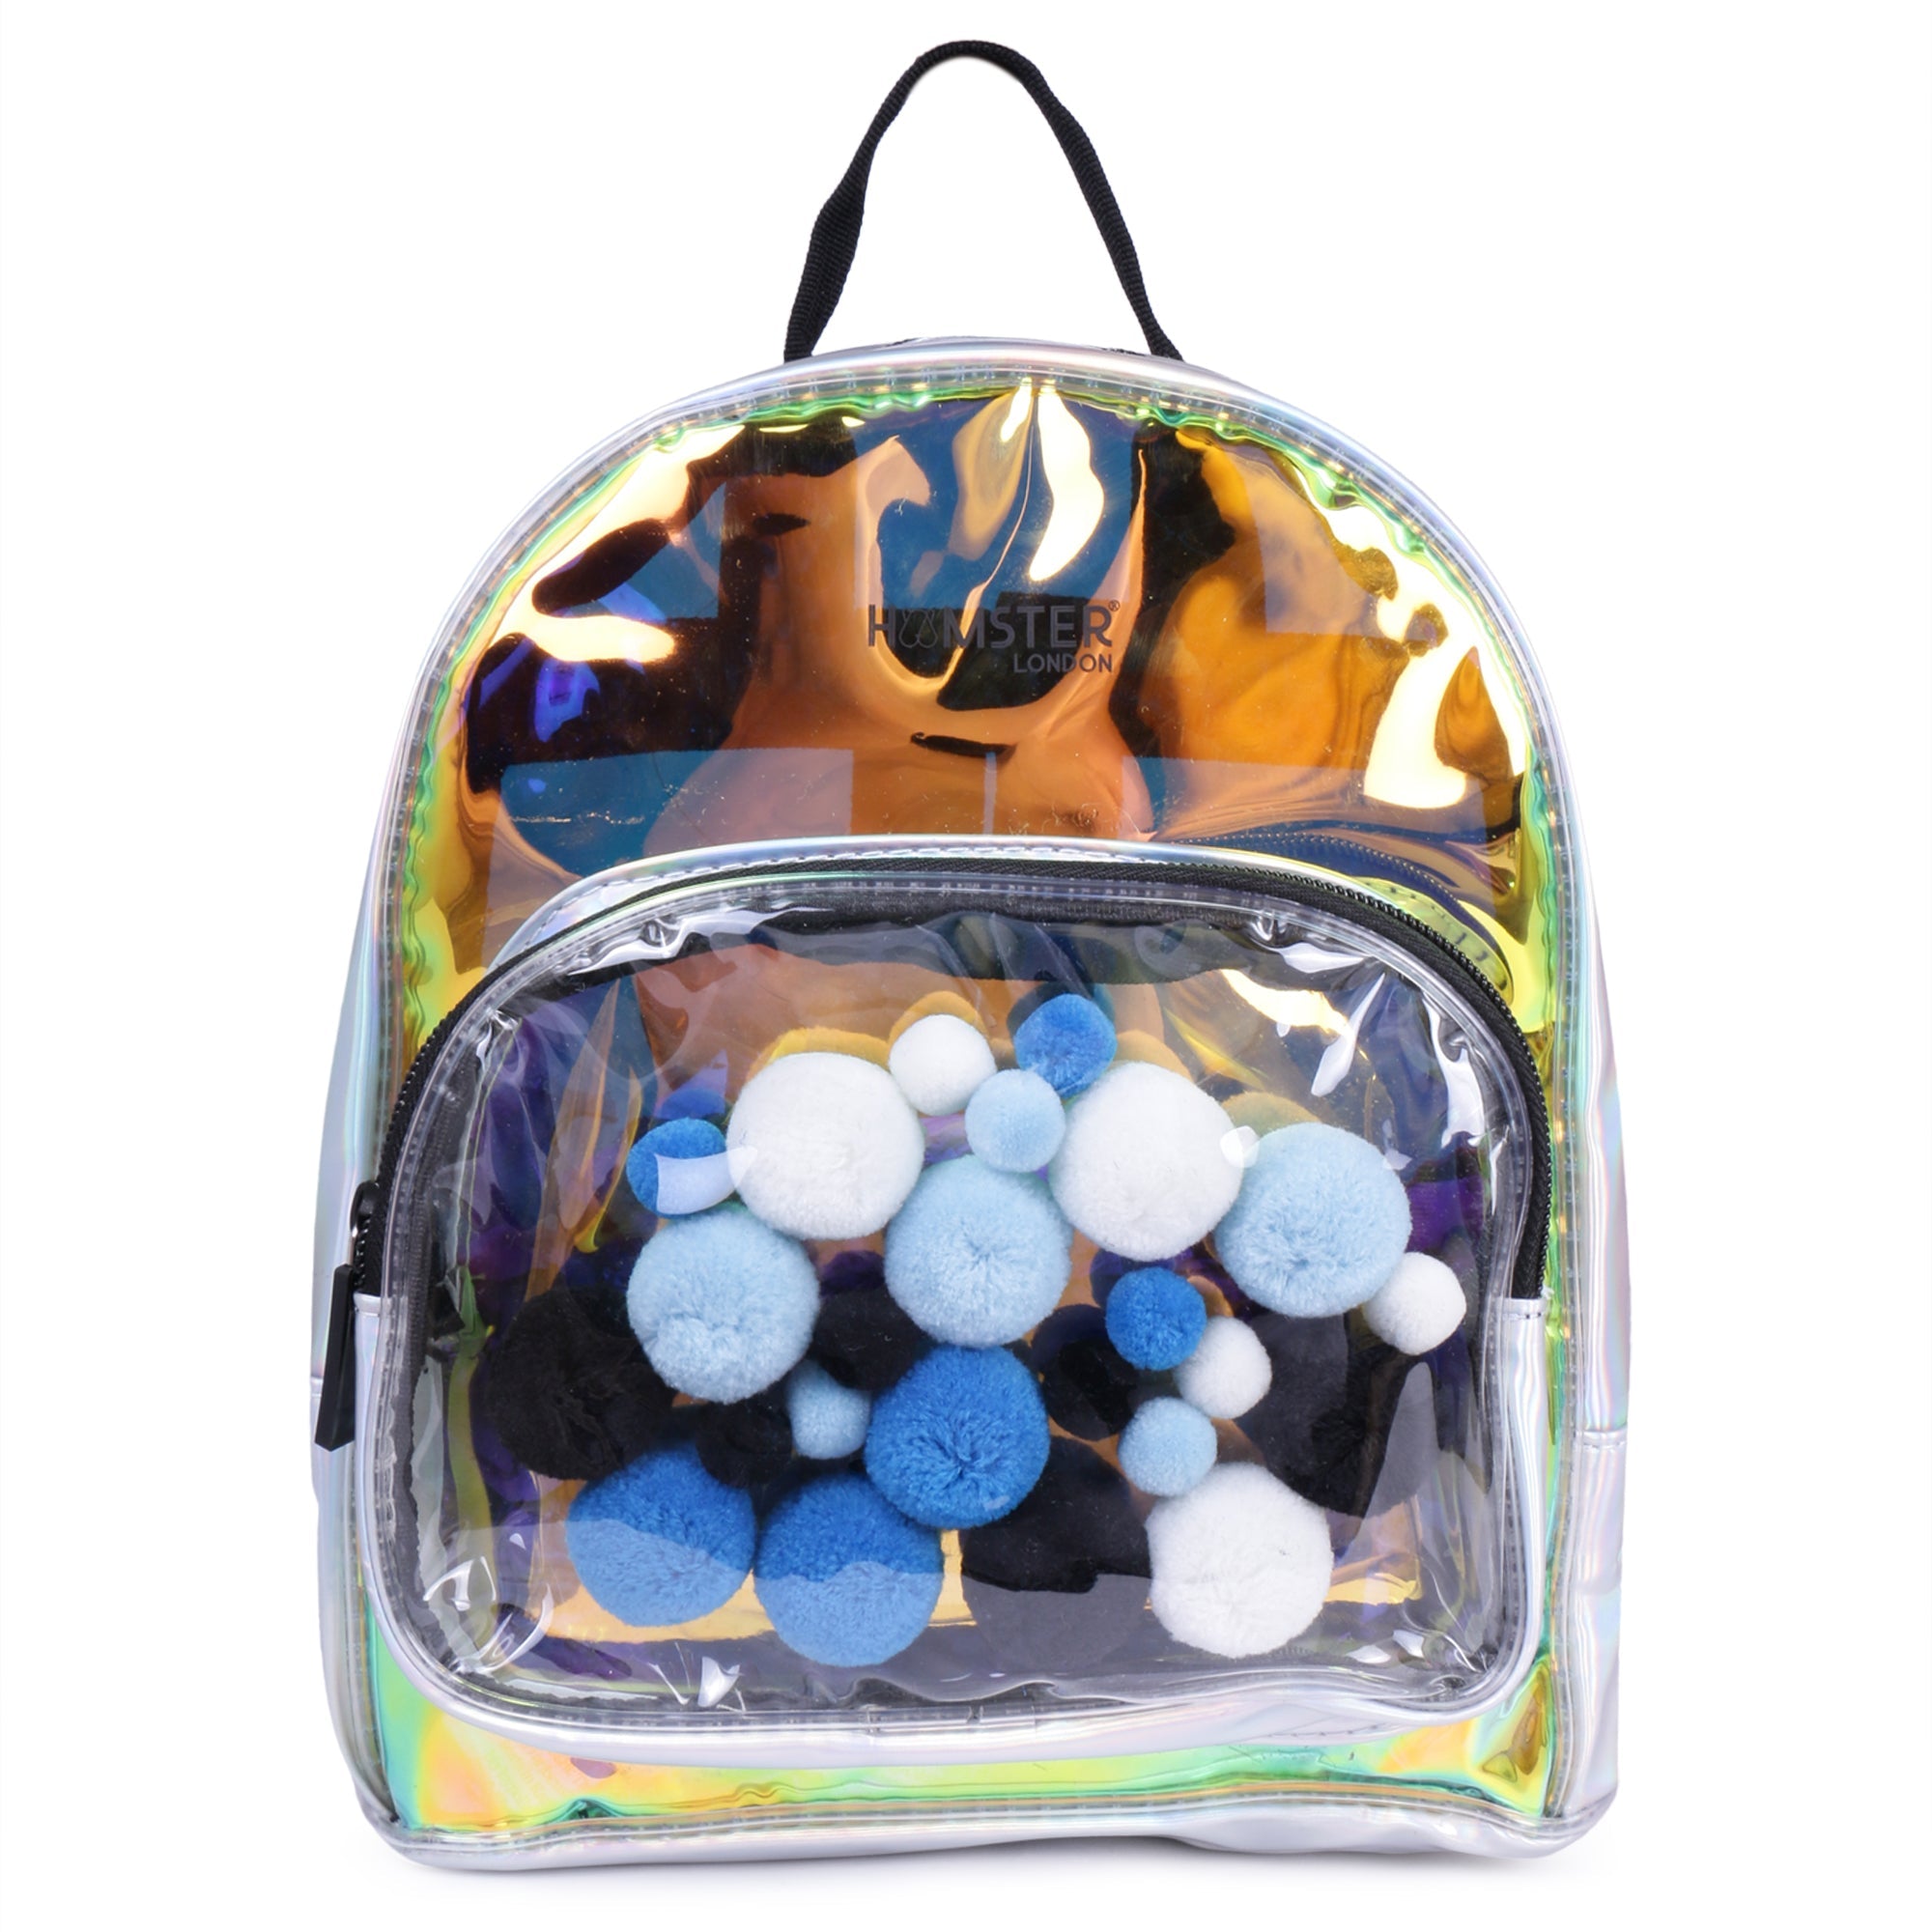 HL Pom Pom Small Backpack Blue With Personalization